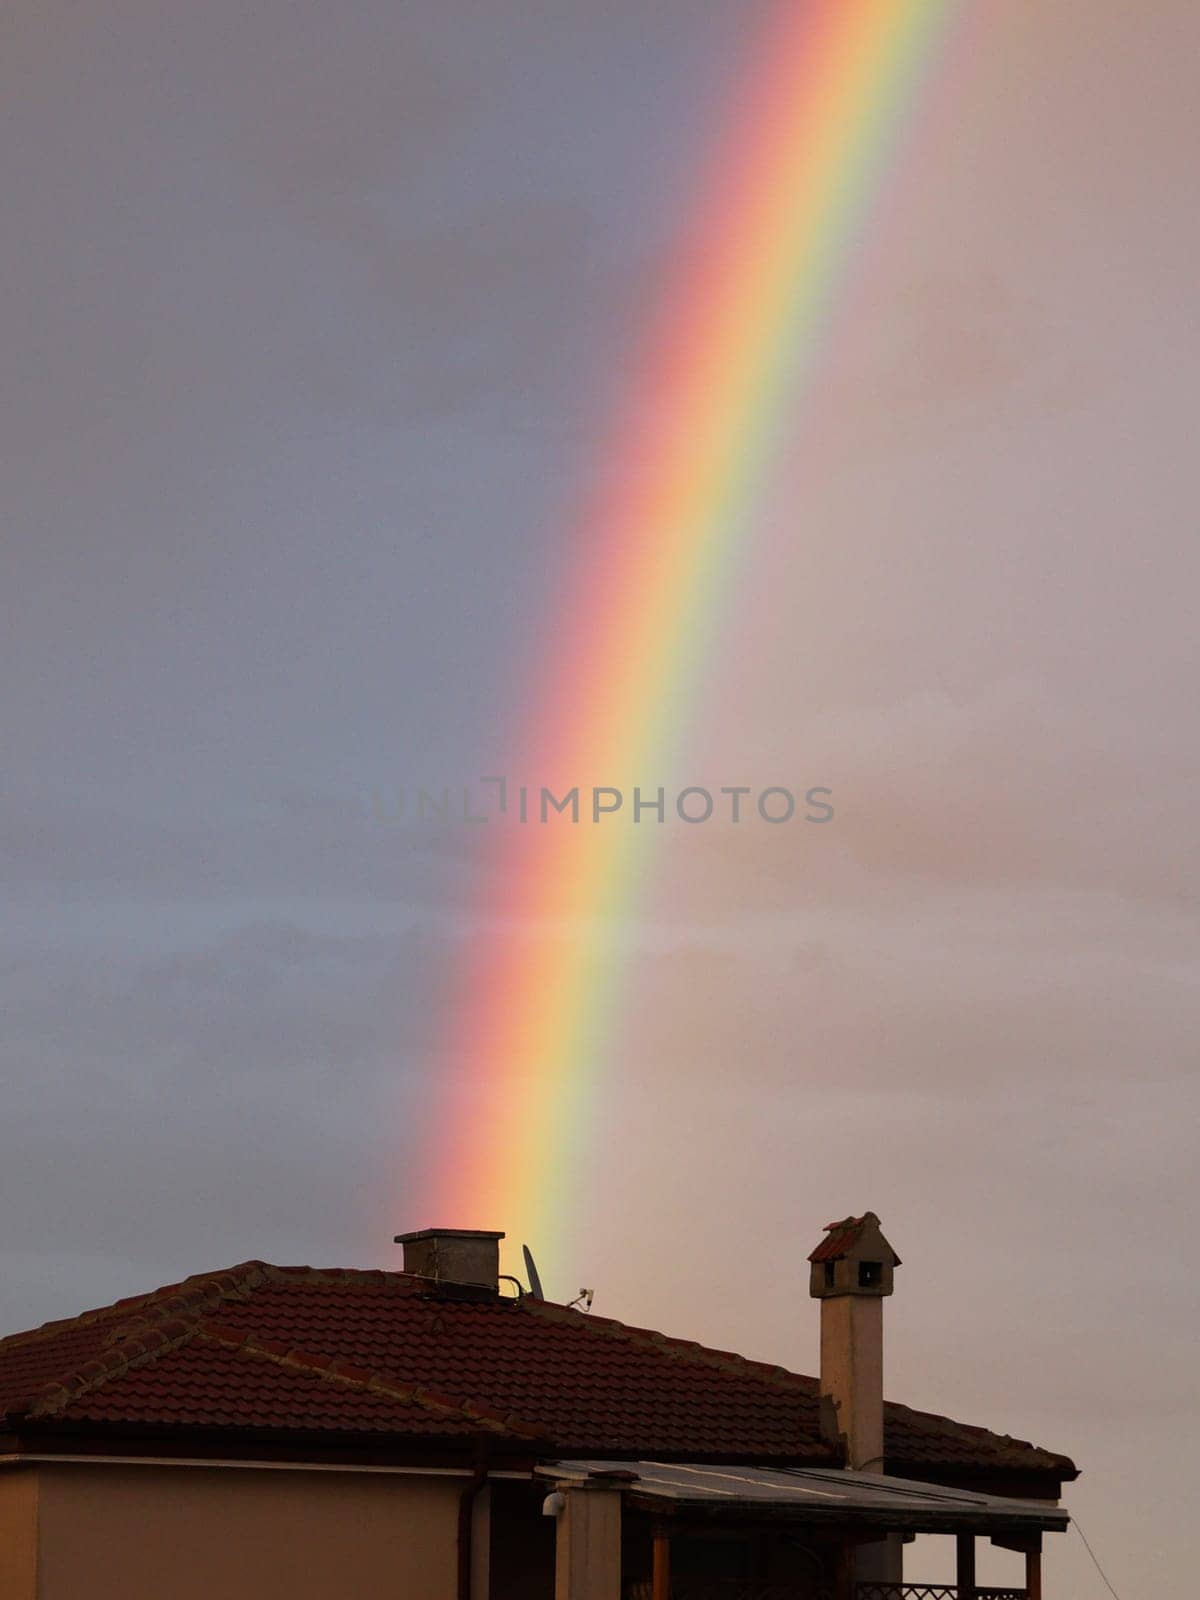 Multicolored rainbow in the sky after the rain over the roof of the house by Annado